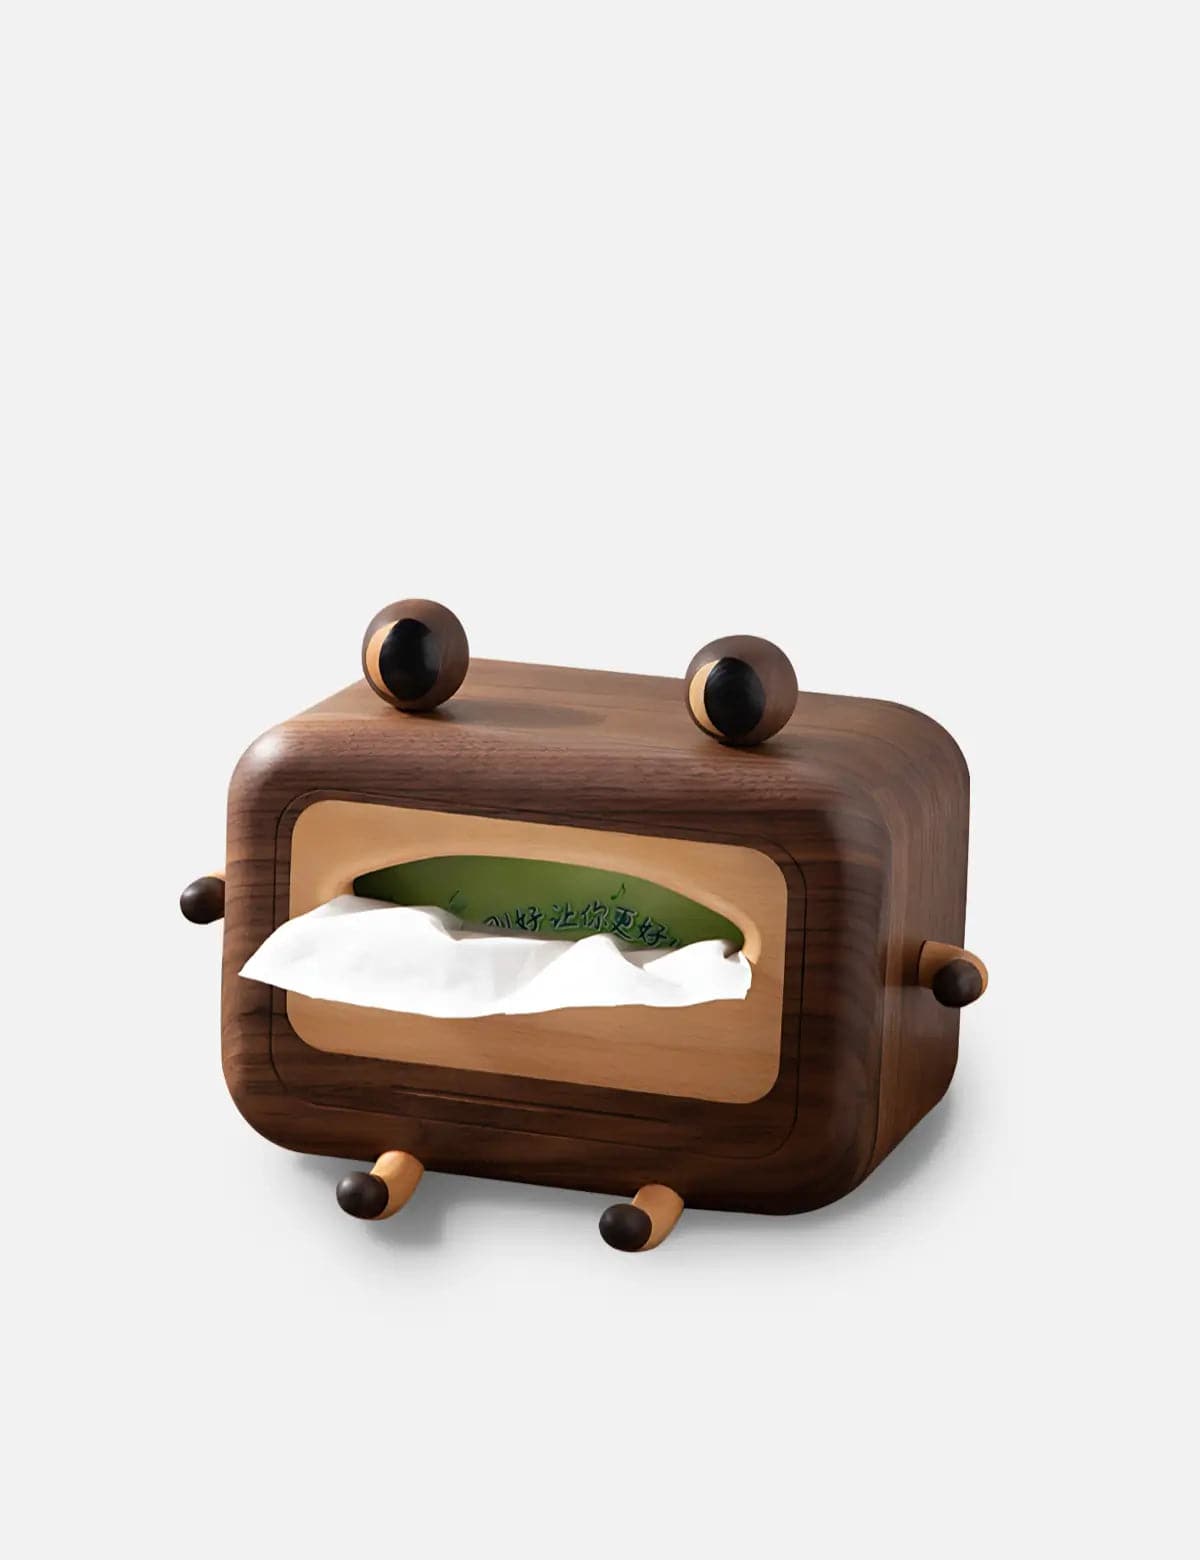 mr-frog-wooden-tissue-box-handcrafted-countertop-decor-01